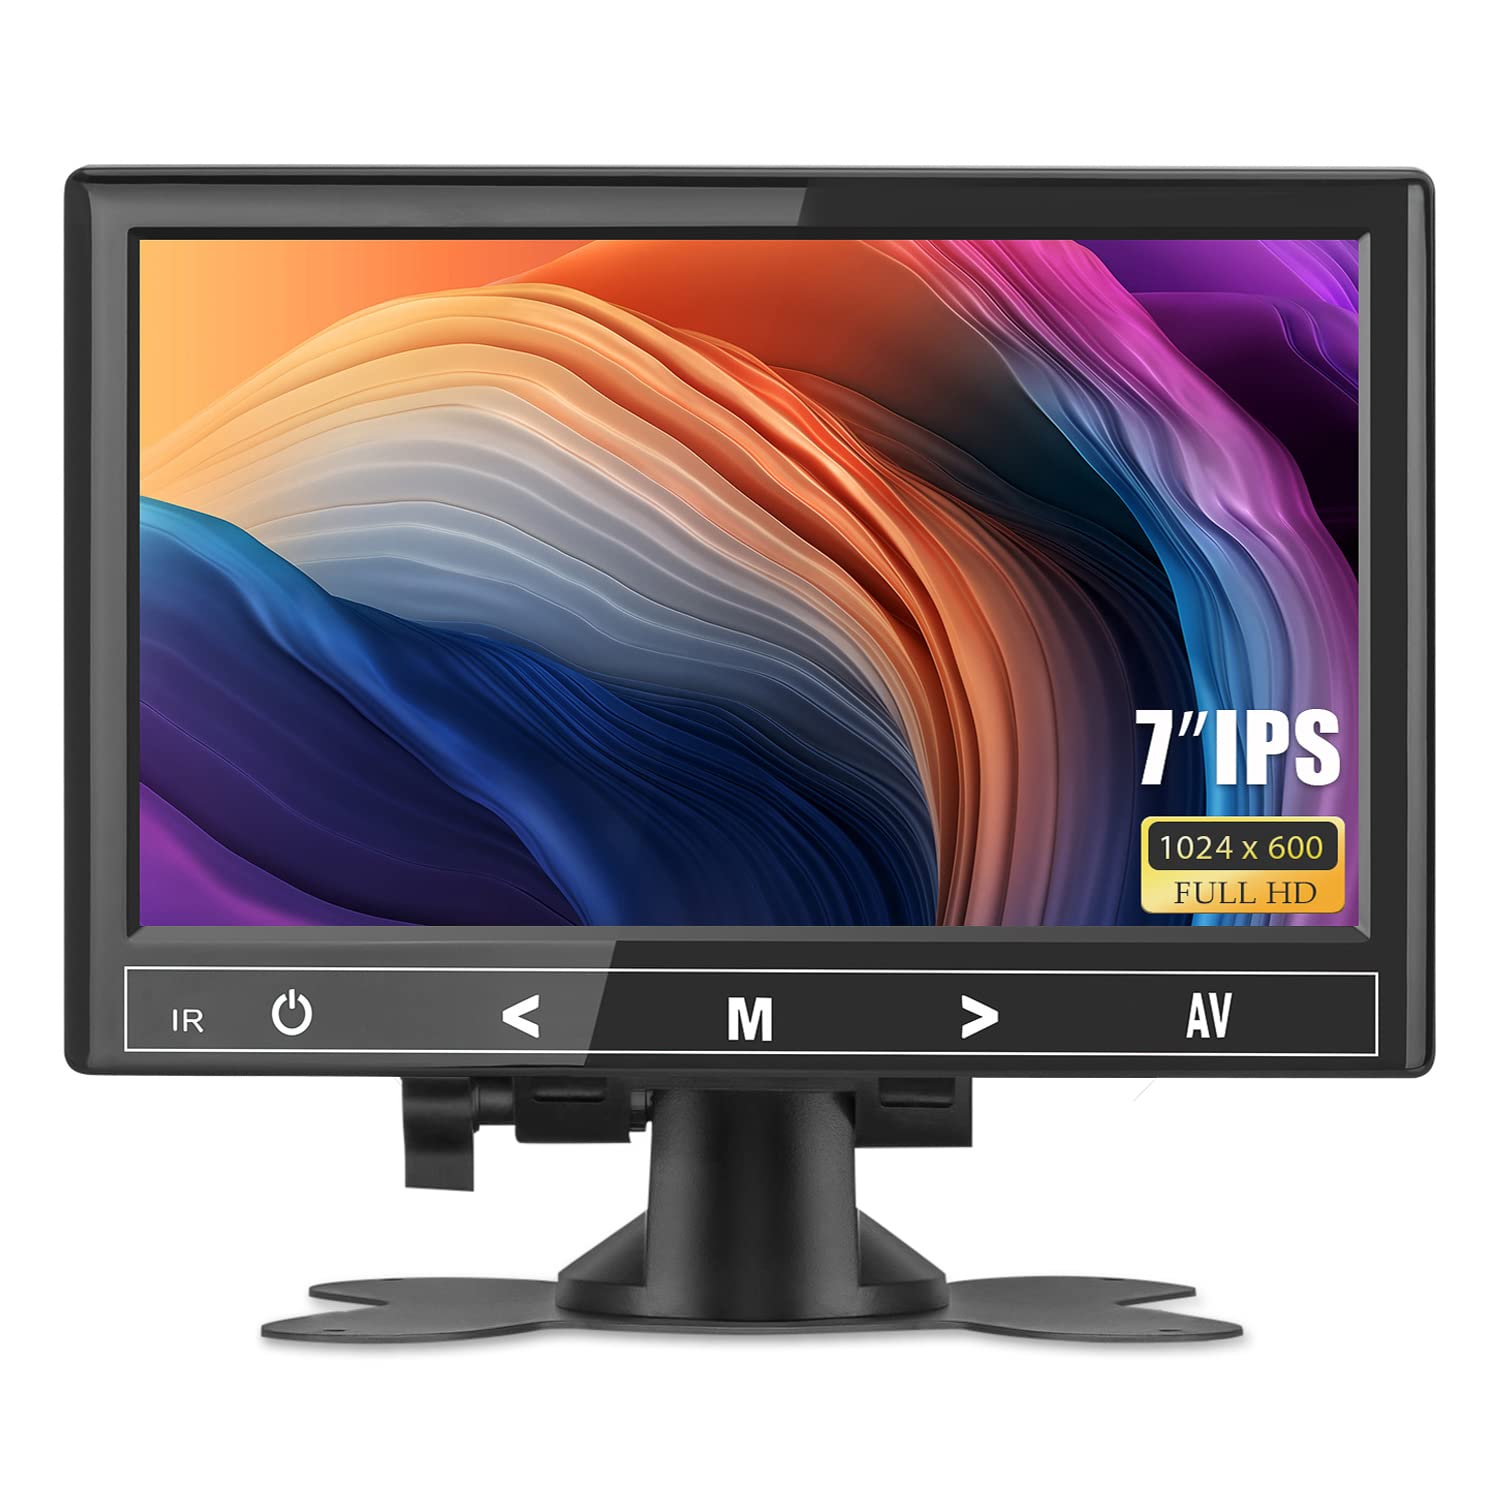 Haiway 7 inch Small HDMI Monitor, 1024x600 Resolution Small 1080P Portable IPS Monitor with Remote Control with Built-in Dual Speakers HDMI VGA Inp...